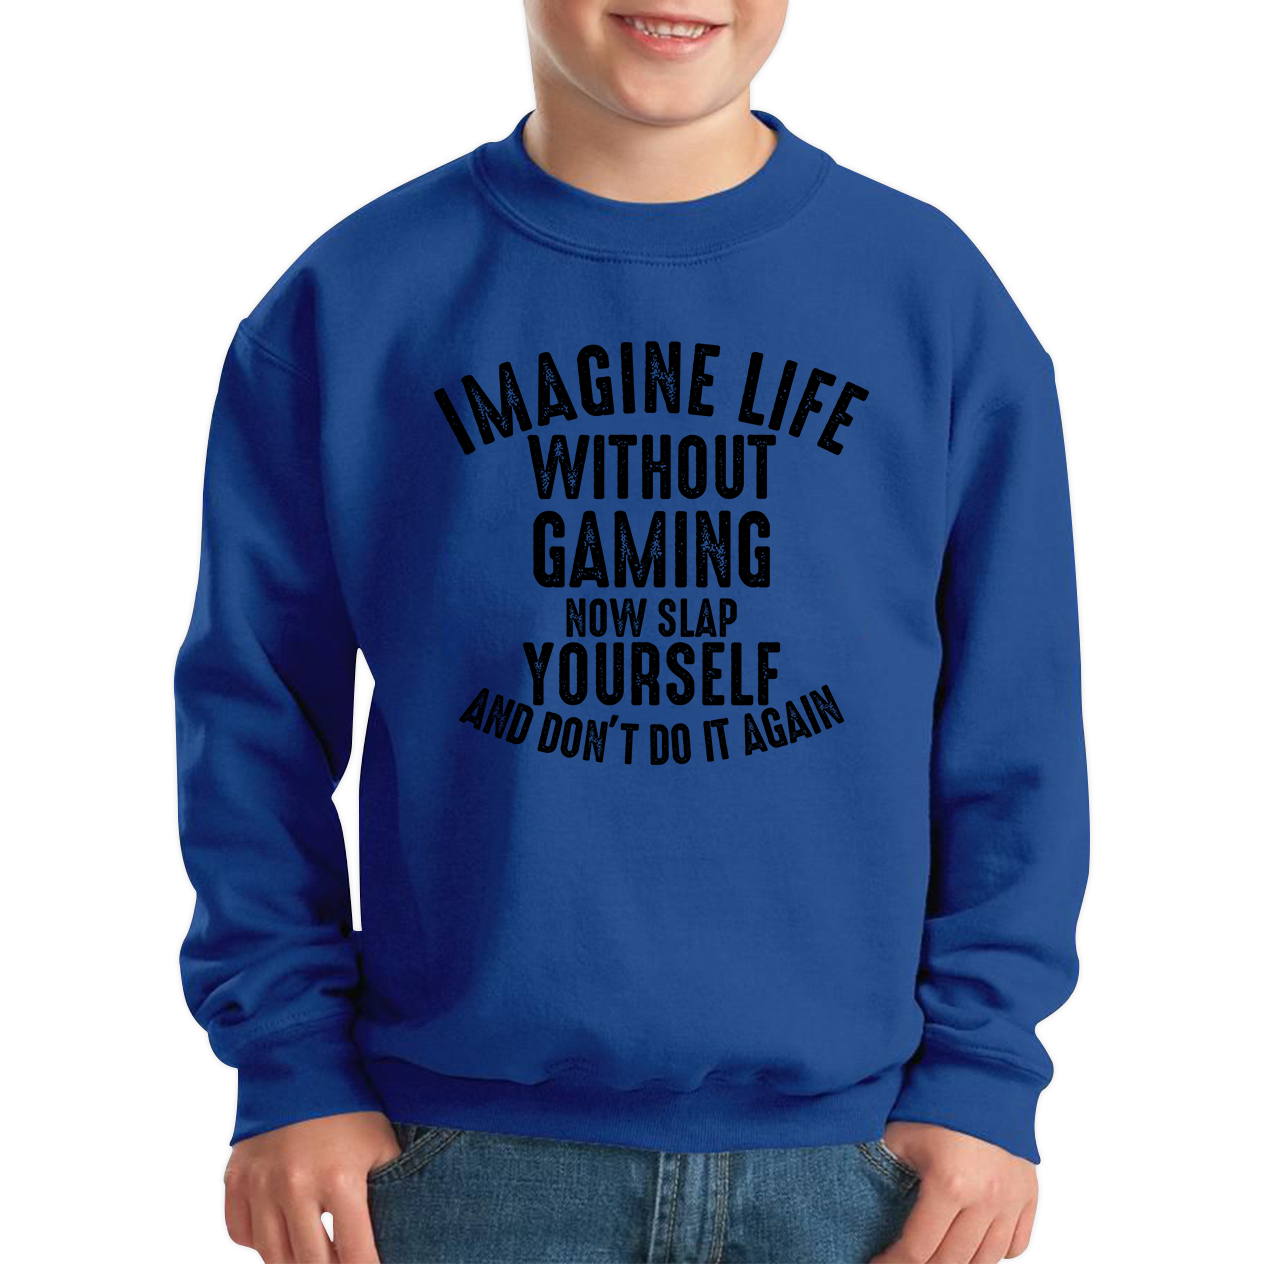 Imagine Life Without Gaming Now Slap Yourself And Don't Do It Again Jumper Gamer Players Game Lovers Funny Kids Sweatshirt